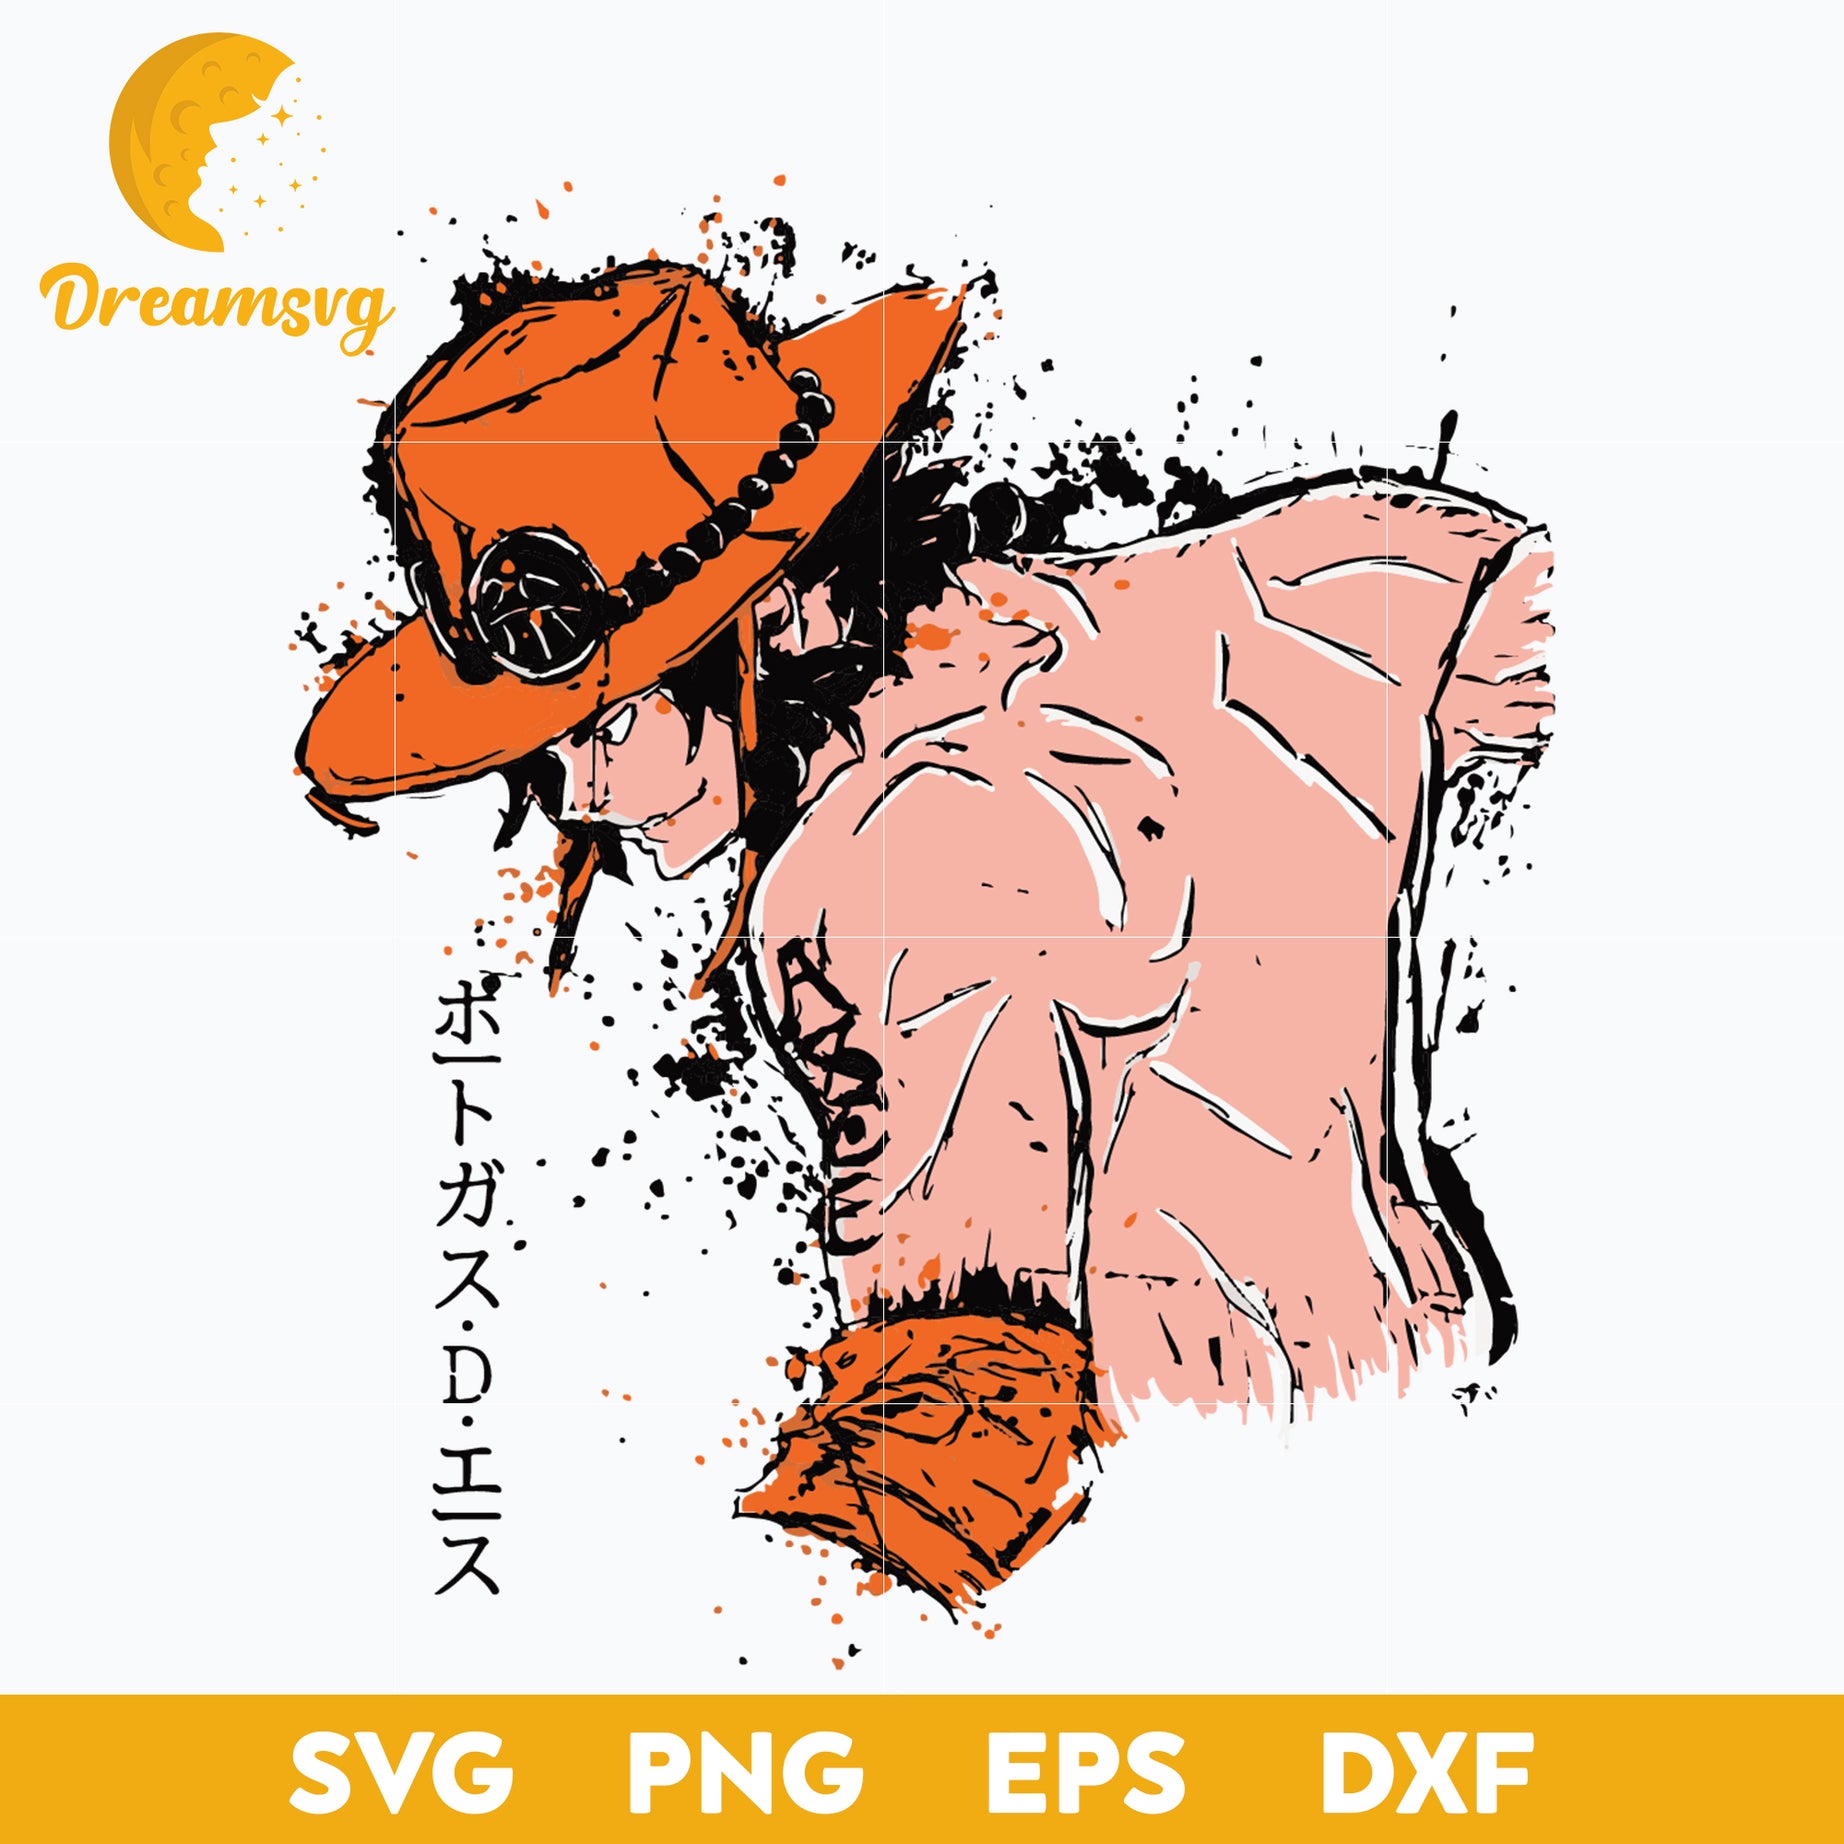 Portgas D. Ace Svg, Ace One Piece Svg, Anime One Piece Svg, One Piece Svg, Anime Manga Svg, Anime Svg, png, eps, dxf digital download.